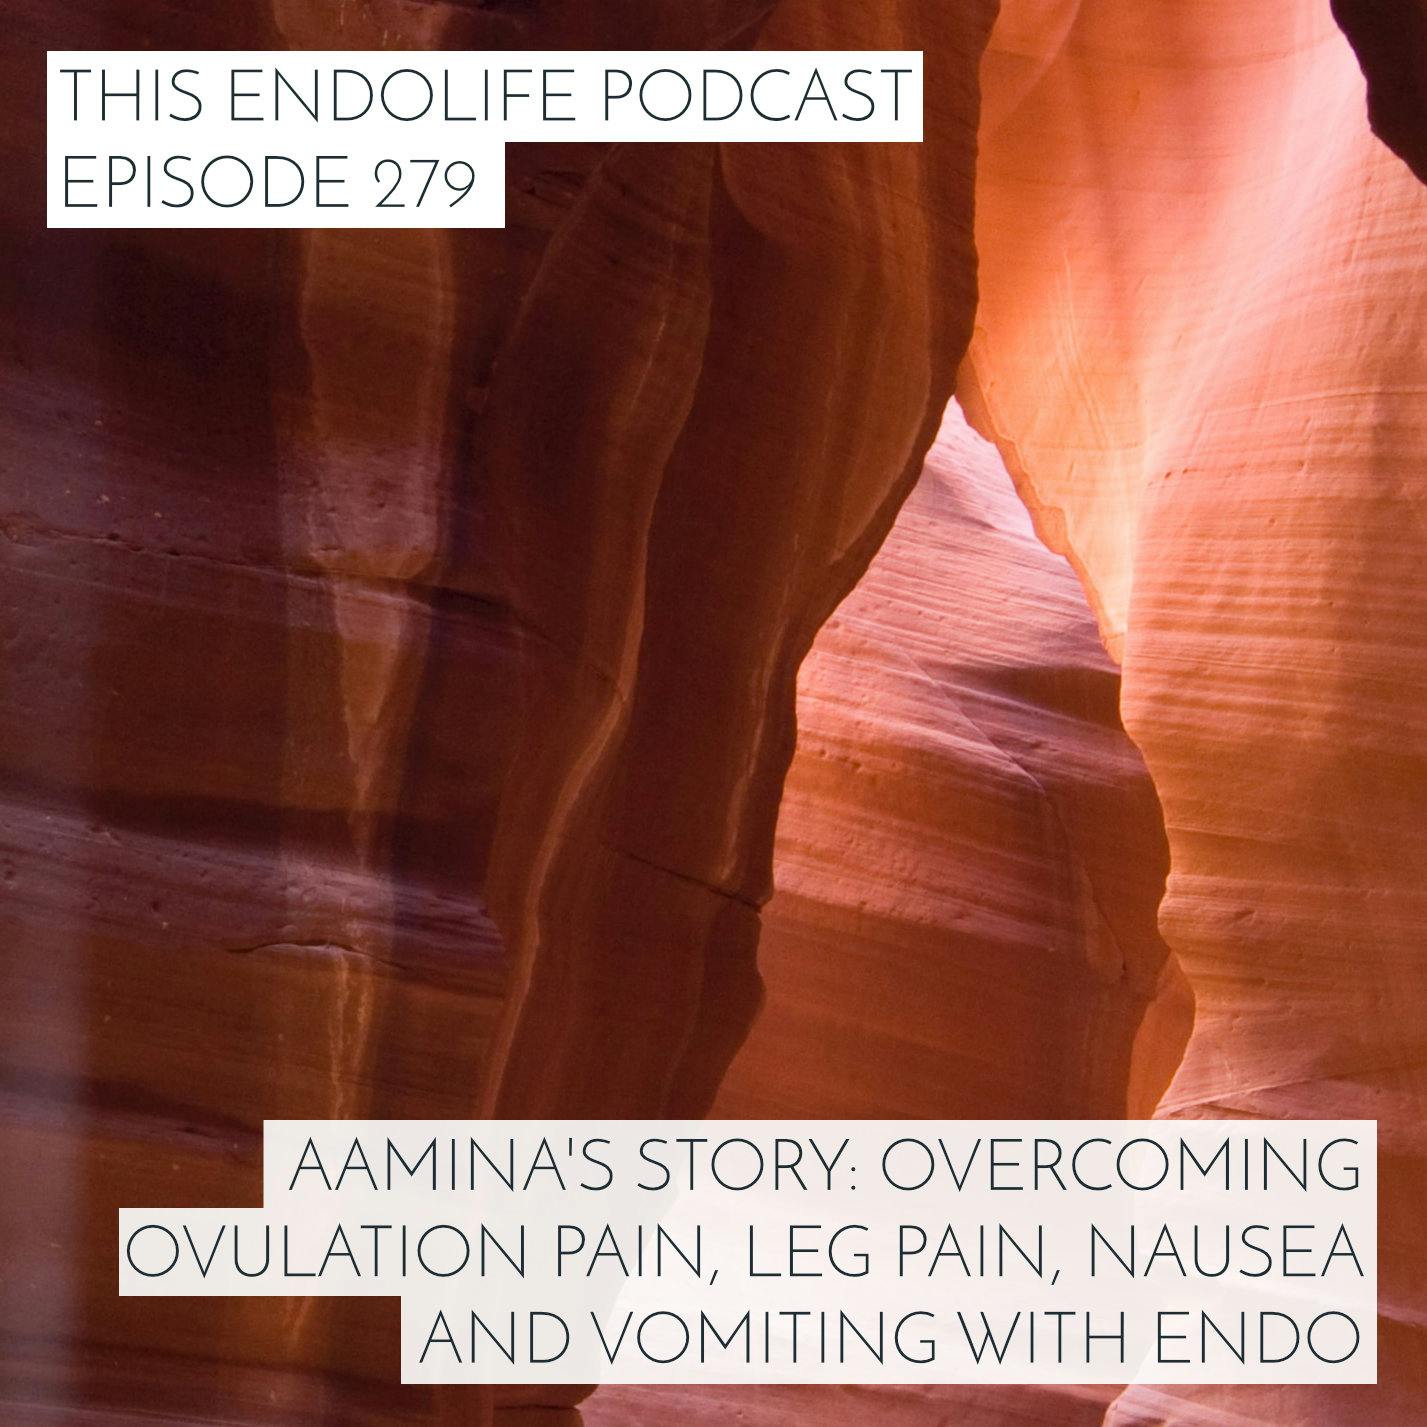 REPLAY: Aamina's Story: Overcoming Ovulation Pain, Leg Pain, Nausea and Vomiting with Endo